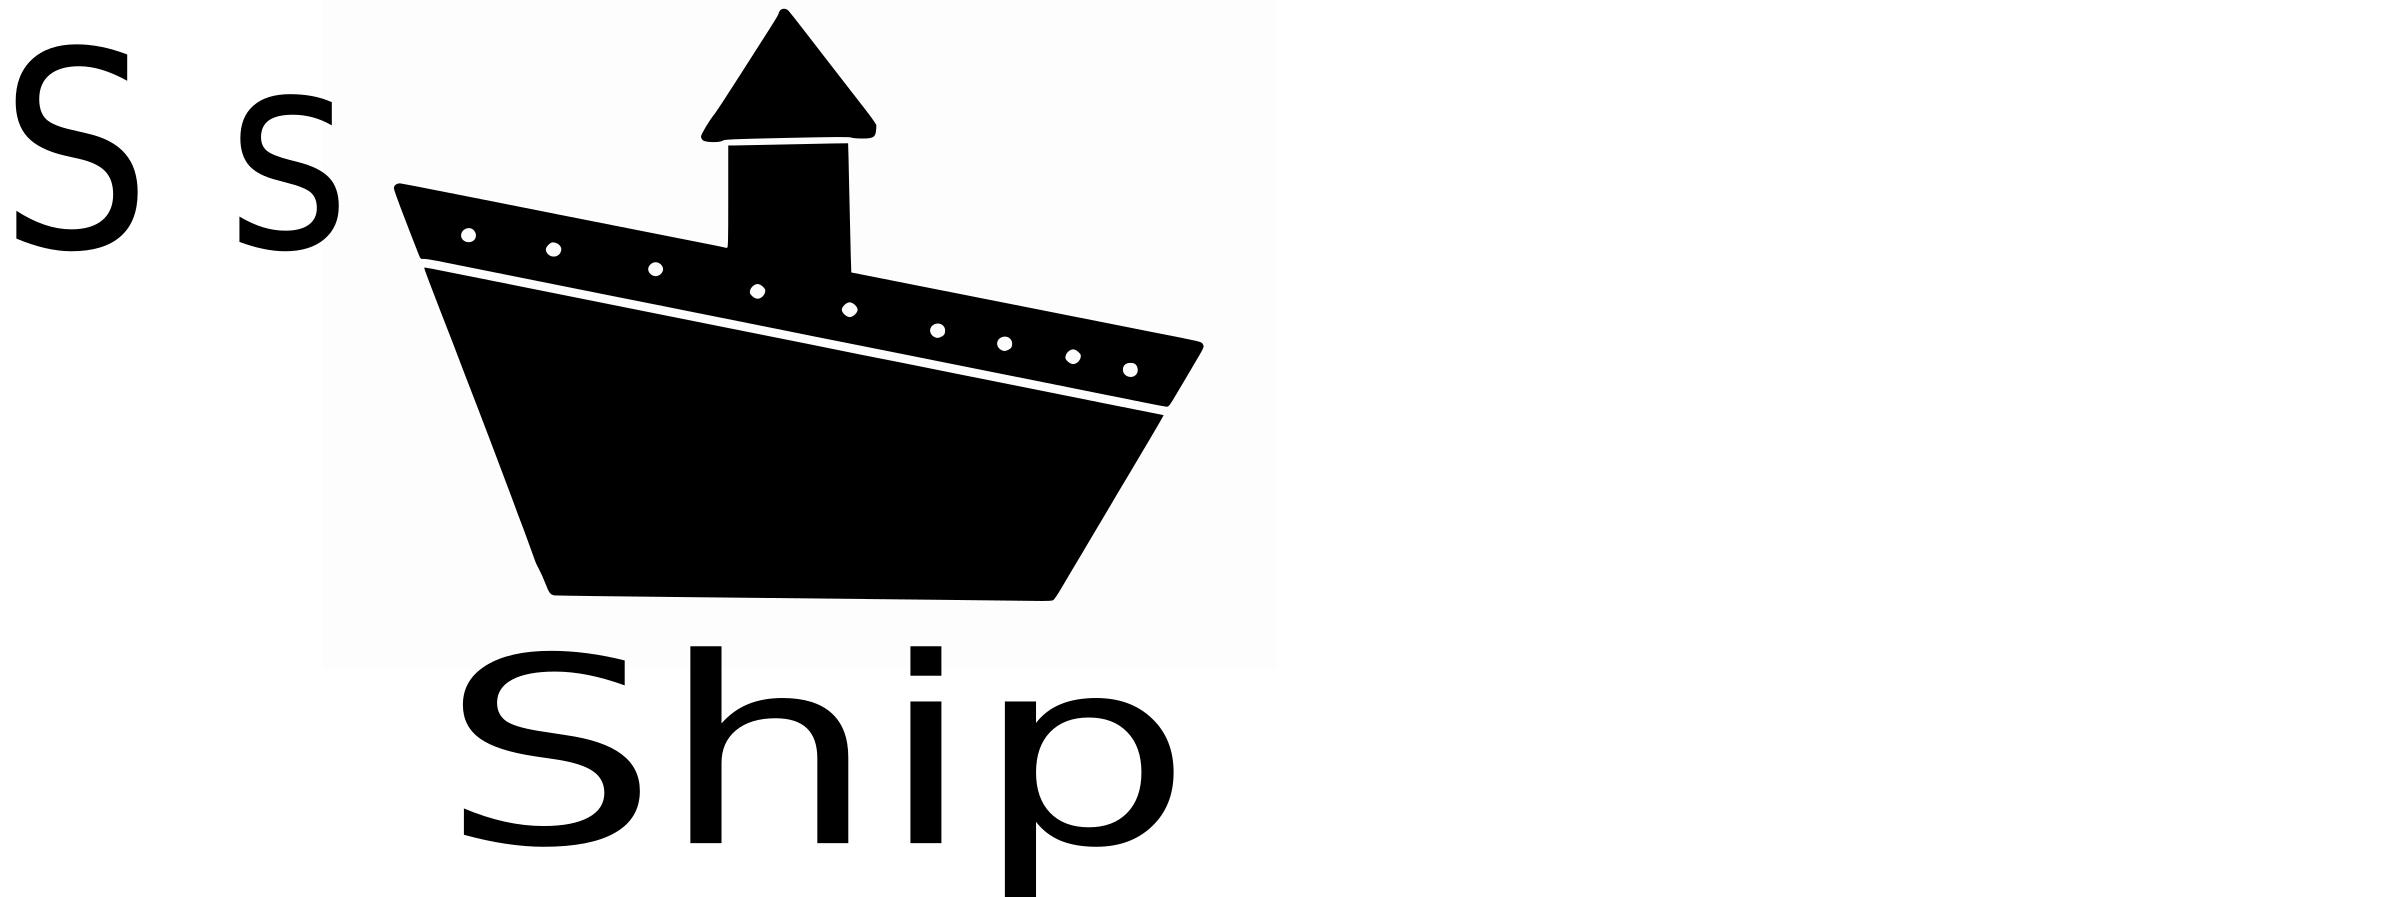 S for Ship png